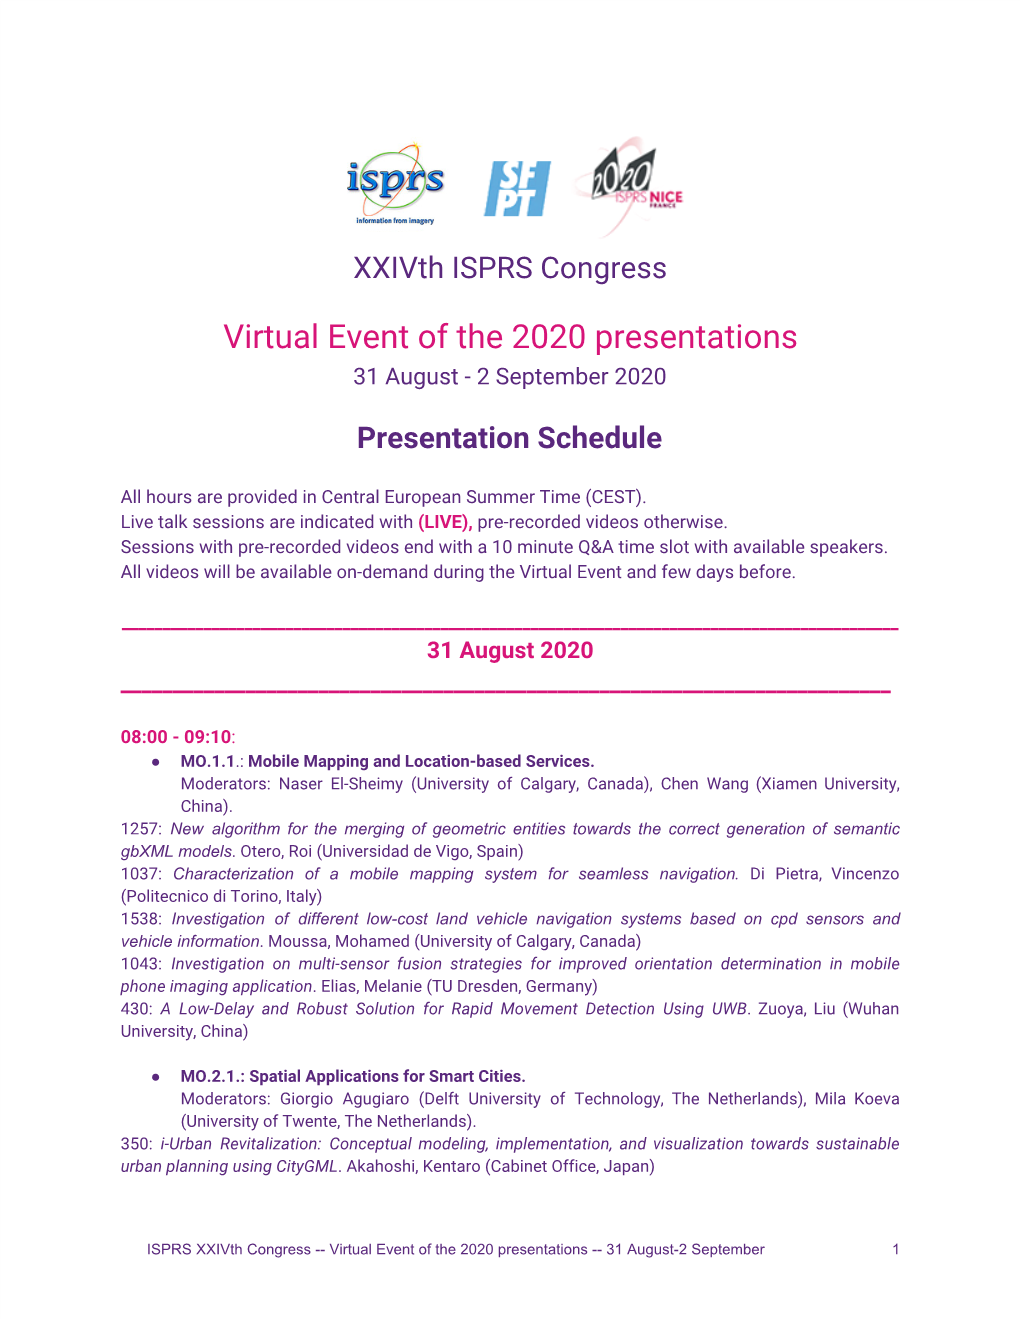 Virtual Event of the 2020 Presentations 31 August - 2 September 2020